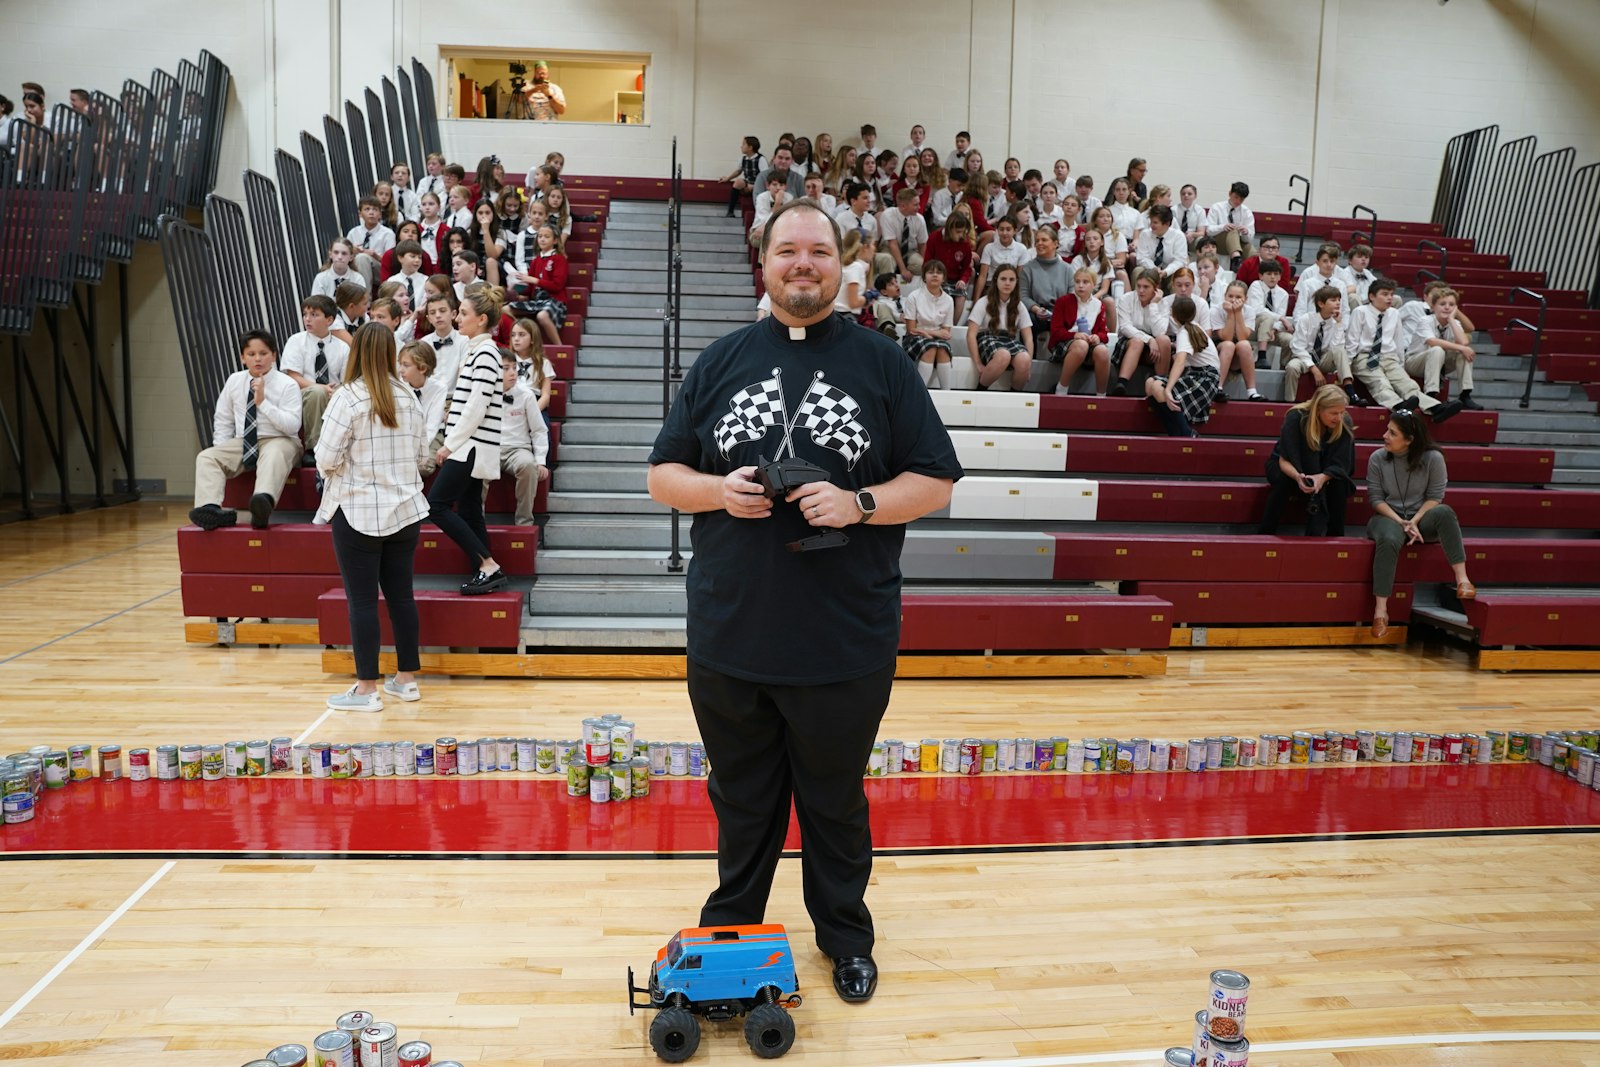 Fr. Andrew Smith of St. Paul on the Lake Parish in Grosse Pointe Farms was the winning driver in the grand prix the school hosted to celebrate how much food it collected. In total, St. Paul on the Lake students collected 5,313 cans and boxes of food. (Daniel Meloy | Detroit Catholic)